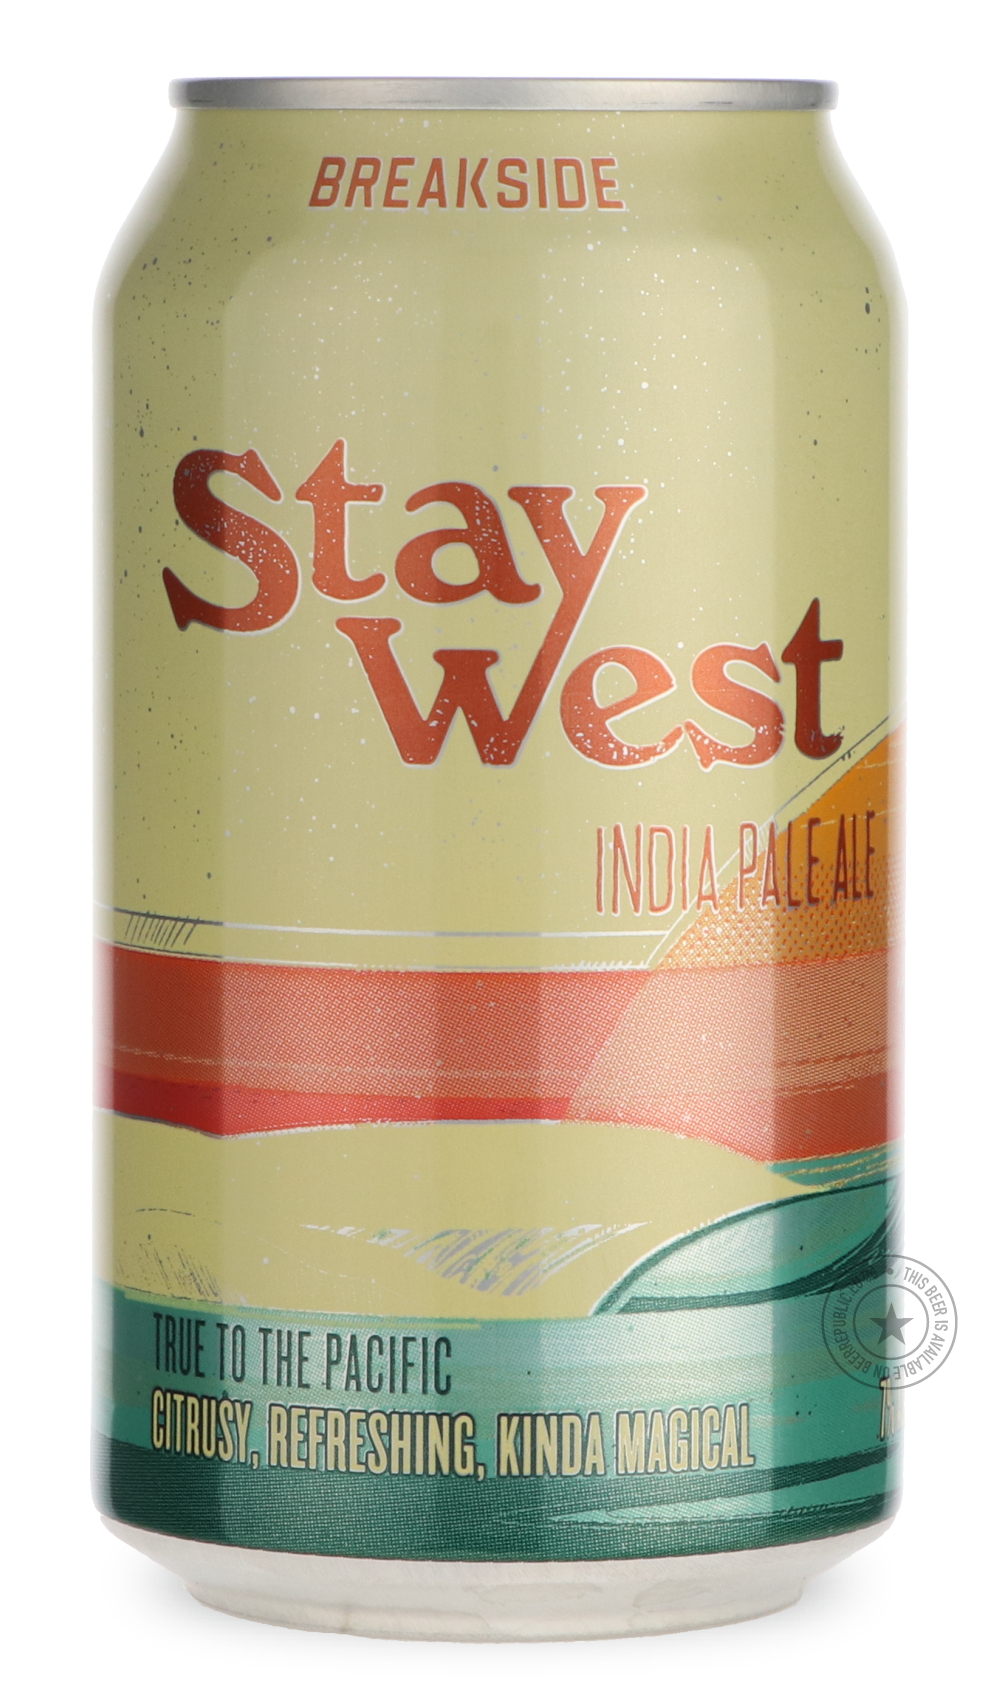 -Breakside- Stay West-IPA- Only @ Beer Republic - The best online beer store for American & Canadian craft beer - Buy beer online from the USA and Canada - Bier online kopen - Amerikaans bier kopen - Craft beer store - Craft beer kopen - Amerikanisch bier kaufen - Bier online kaufen - Acheter biere online - IPA - Stout - Porter - New England IPA - Hazy IPA - Imperial Stout - Barrel Aged - Barrel Aged Imperial Stout - Brown - Dark beer - Blond - Blonde - Pilsner - Lager - Wheat - Weizen - Amber - Barley Wine